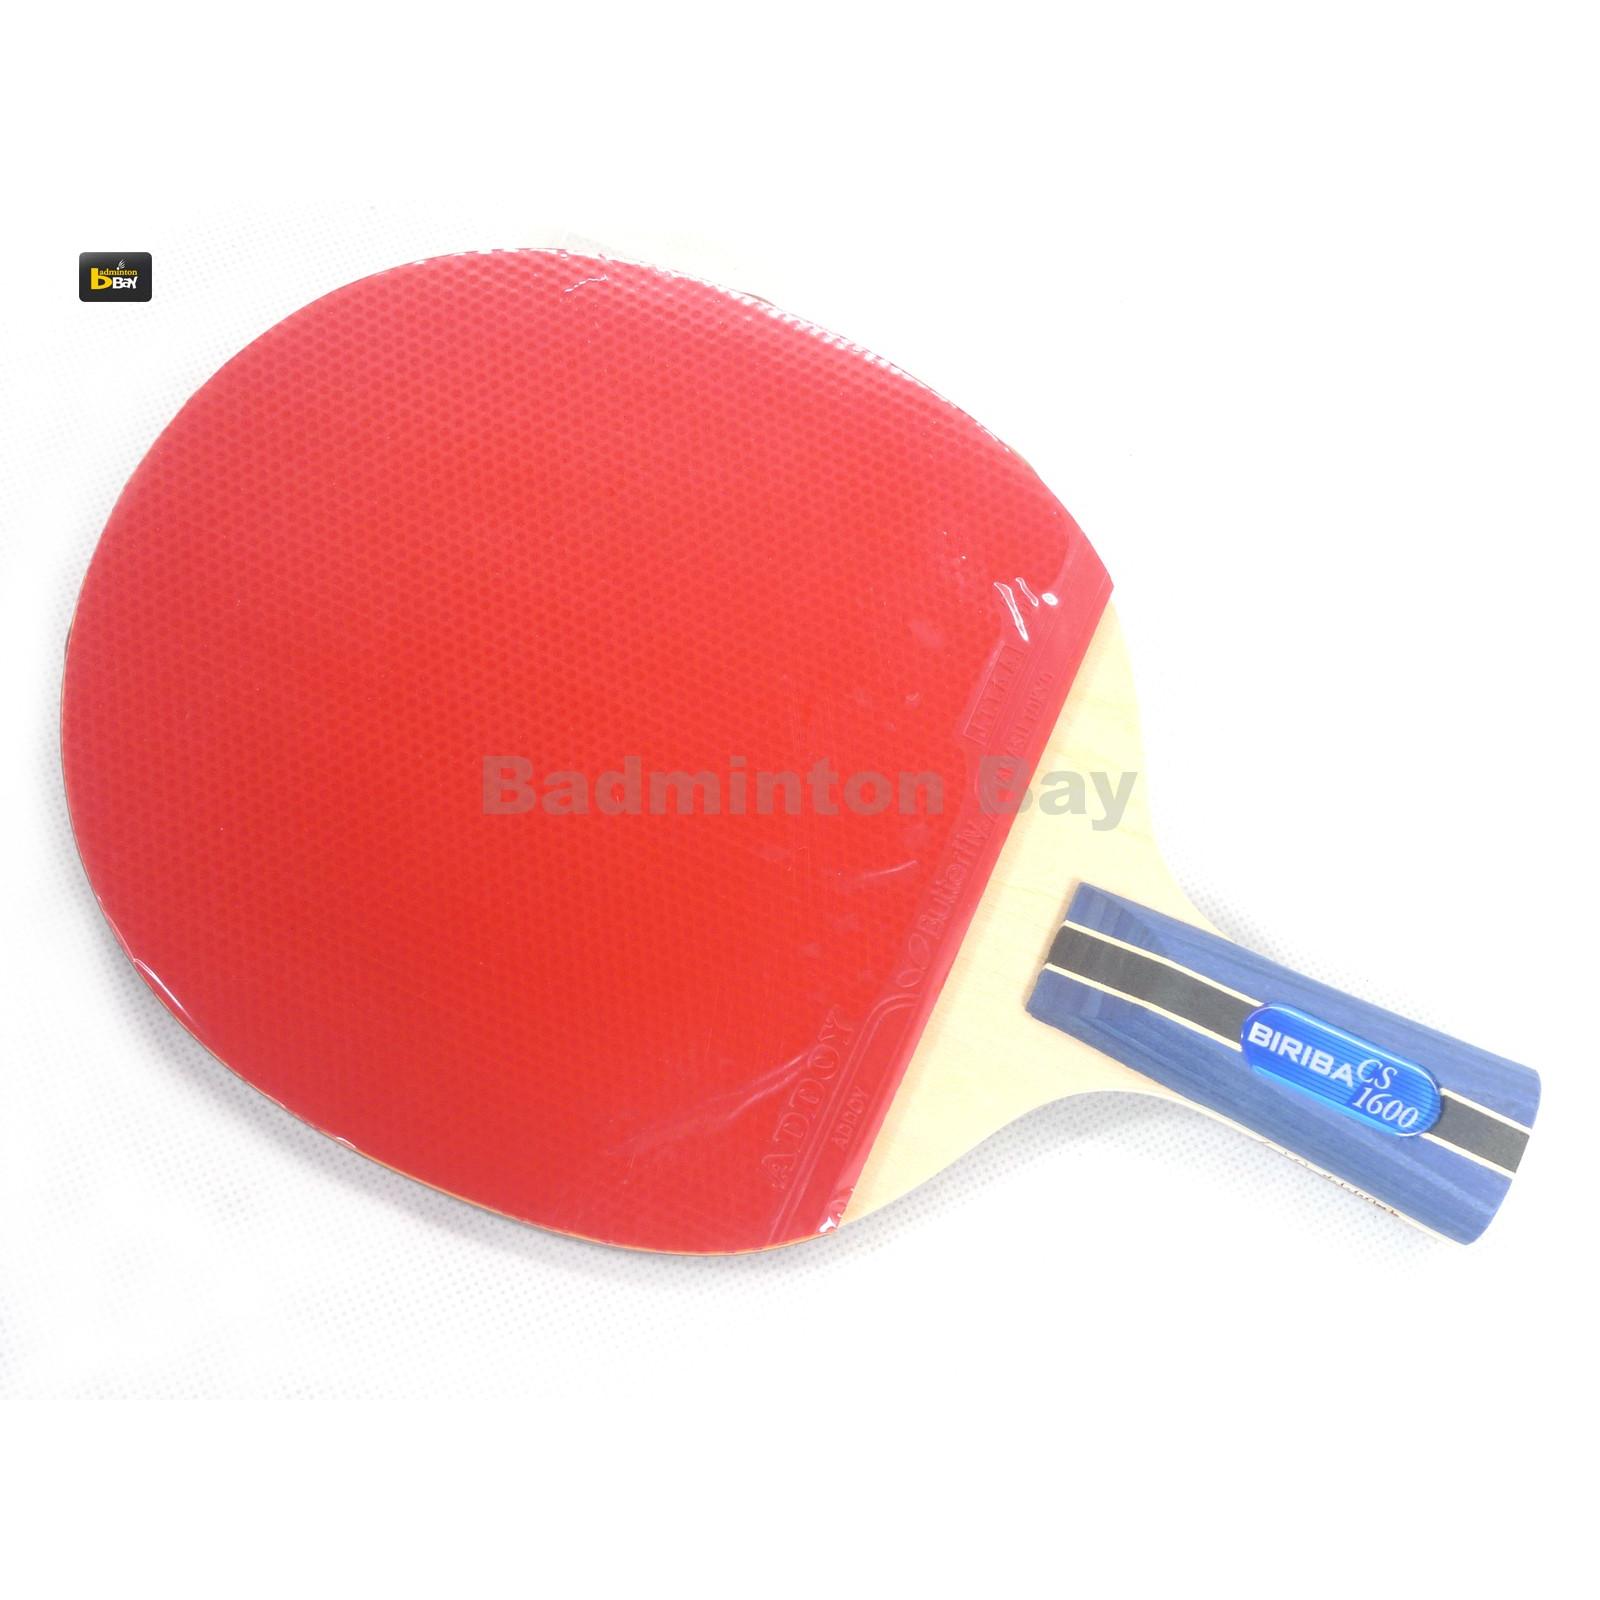 Free Ship High Quality Authentic Neottec 500 Table Tennis & Ping Pong Racket 